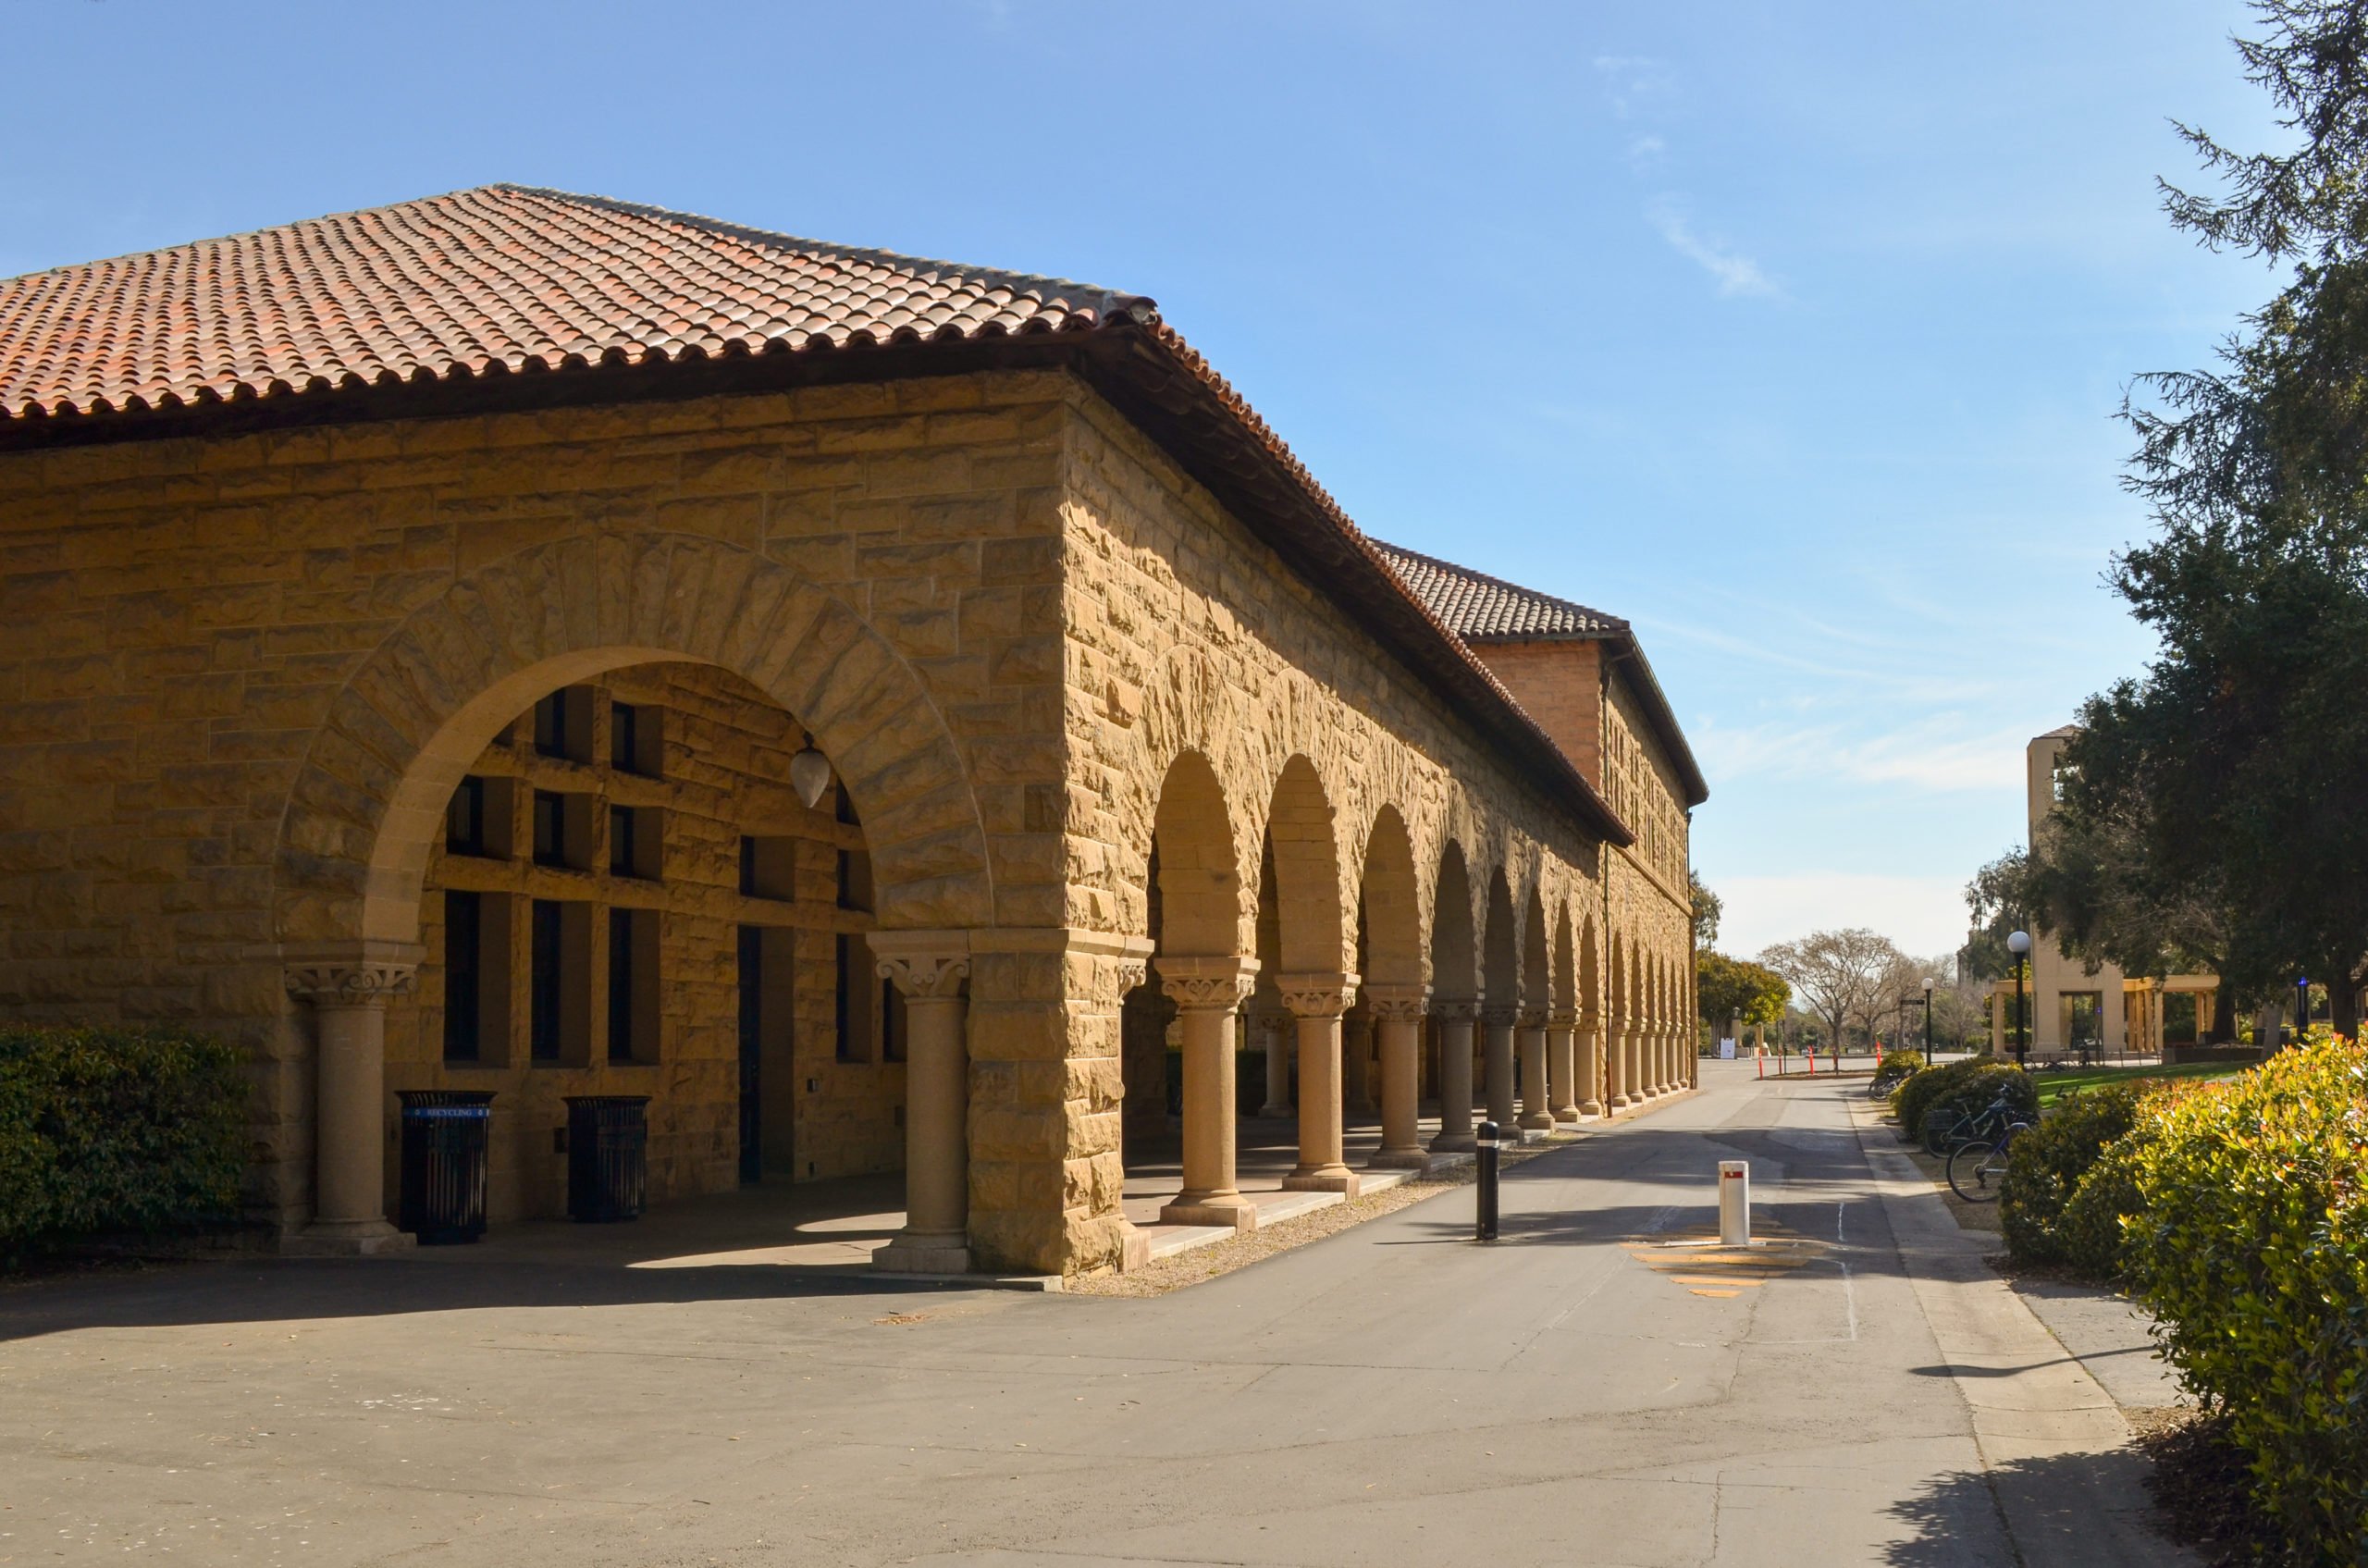 Opinion | Stanford’s dining hall system did not work with my disordered eating. That can change.